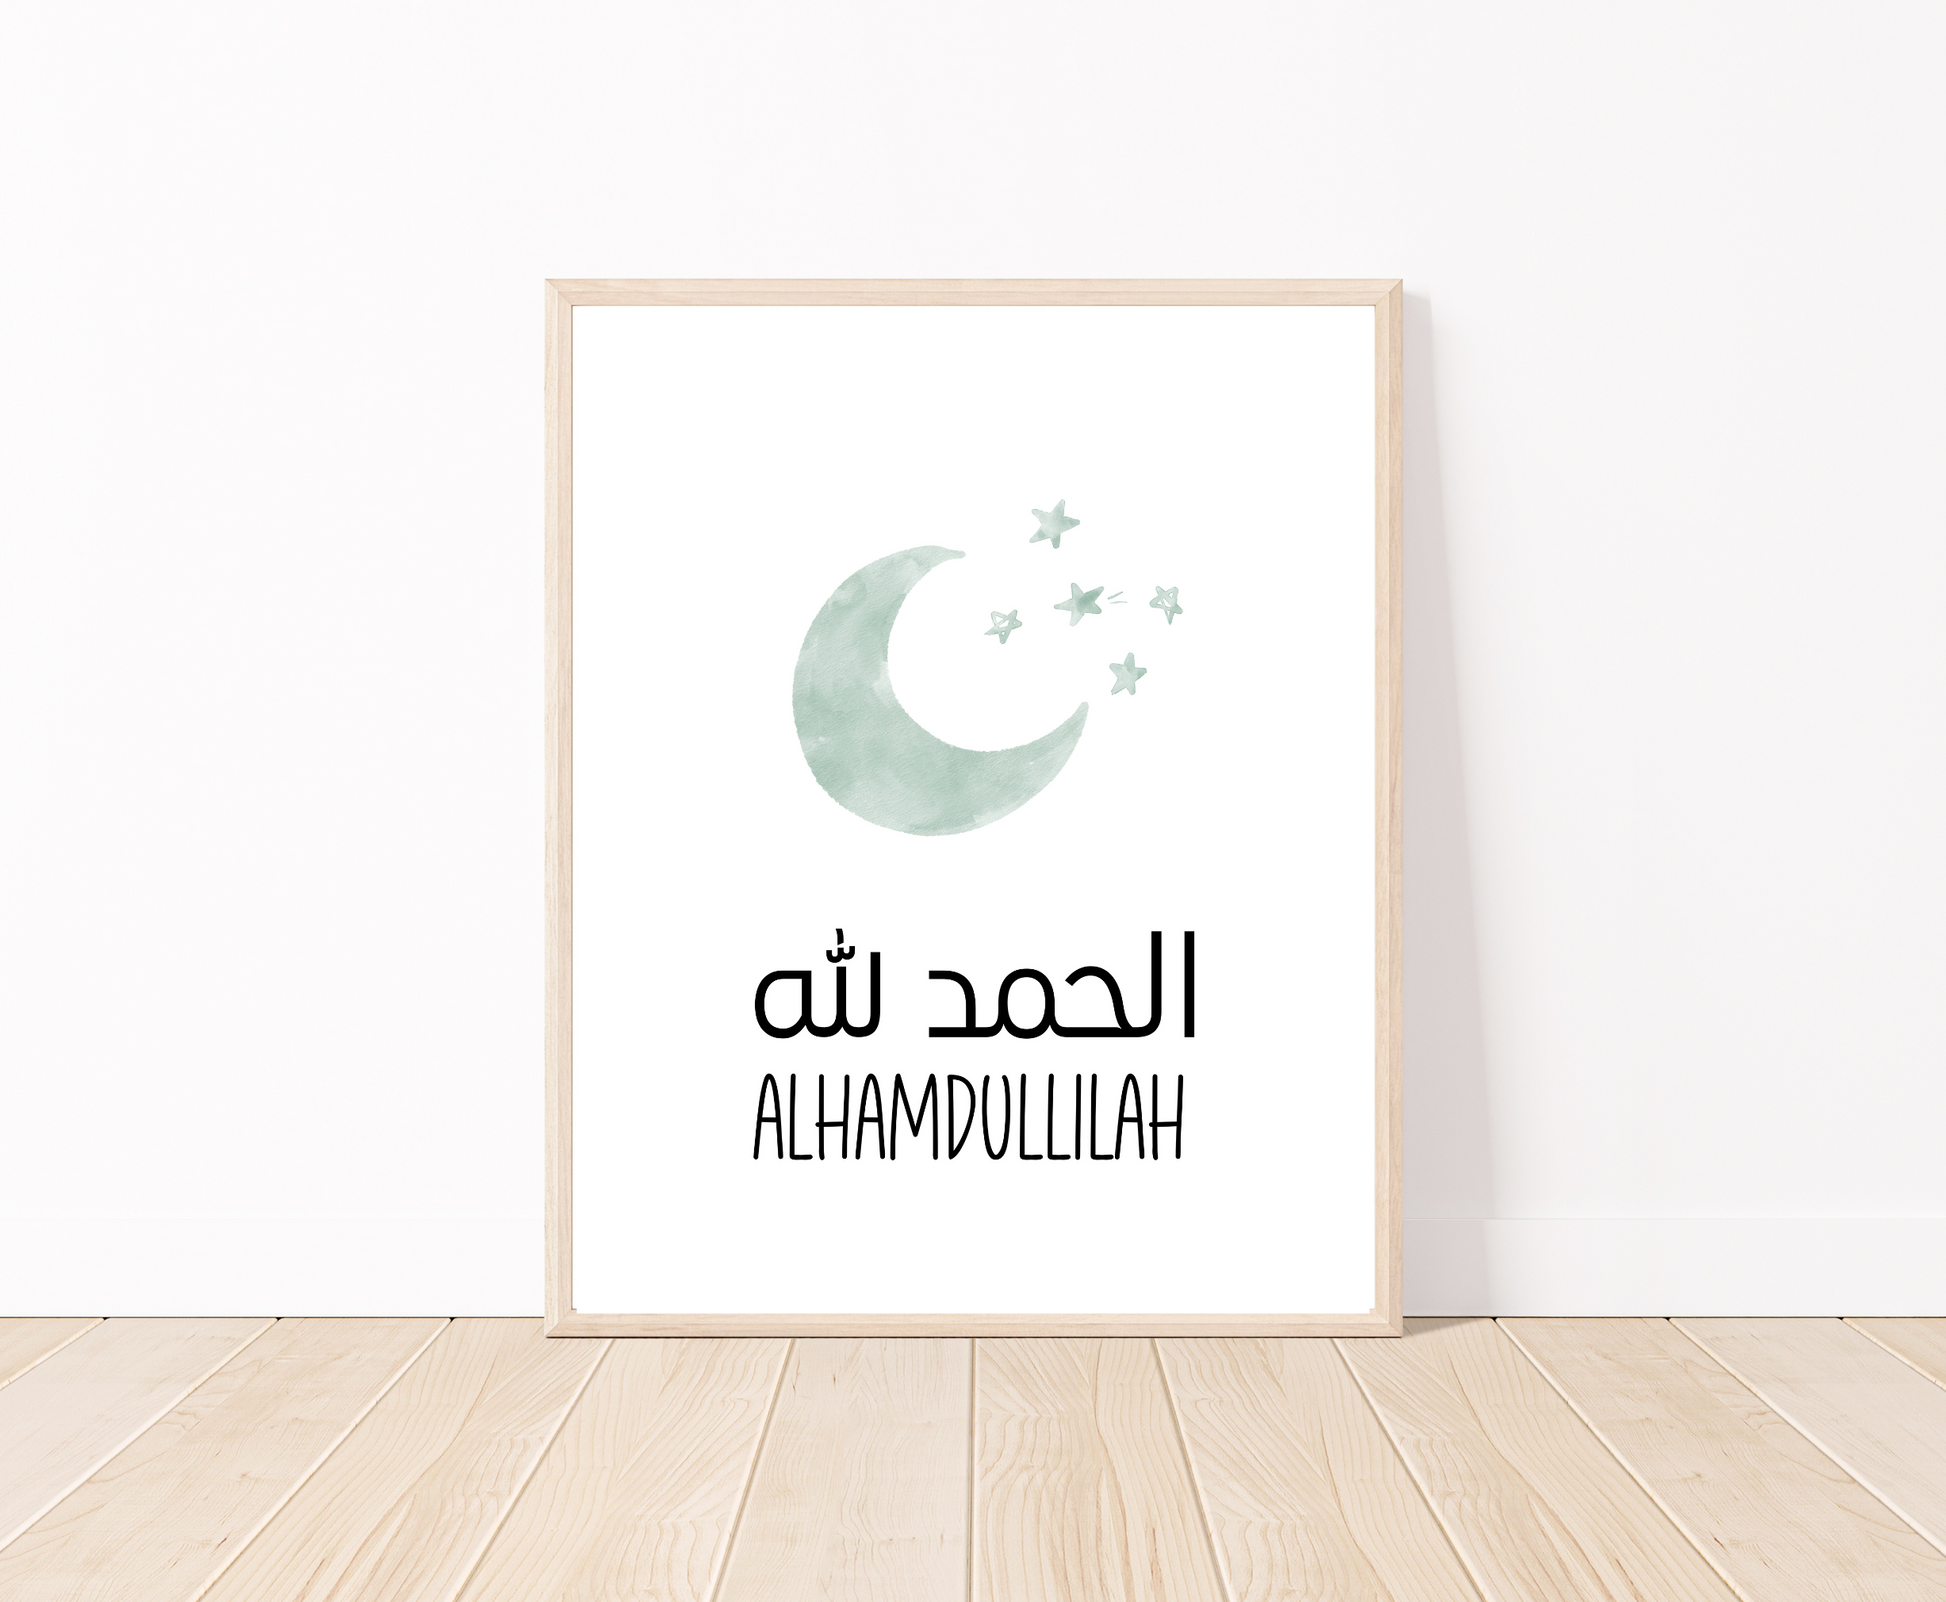 A digital poster that is placed on a white wall and parquet flooring shows a baby green crescent and some tiny stars with “Alhamdulillah” written in both Arabic and English right below.